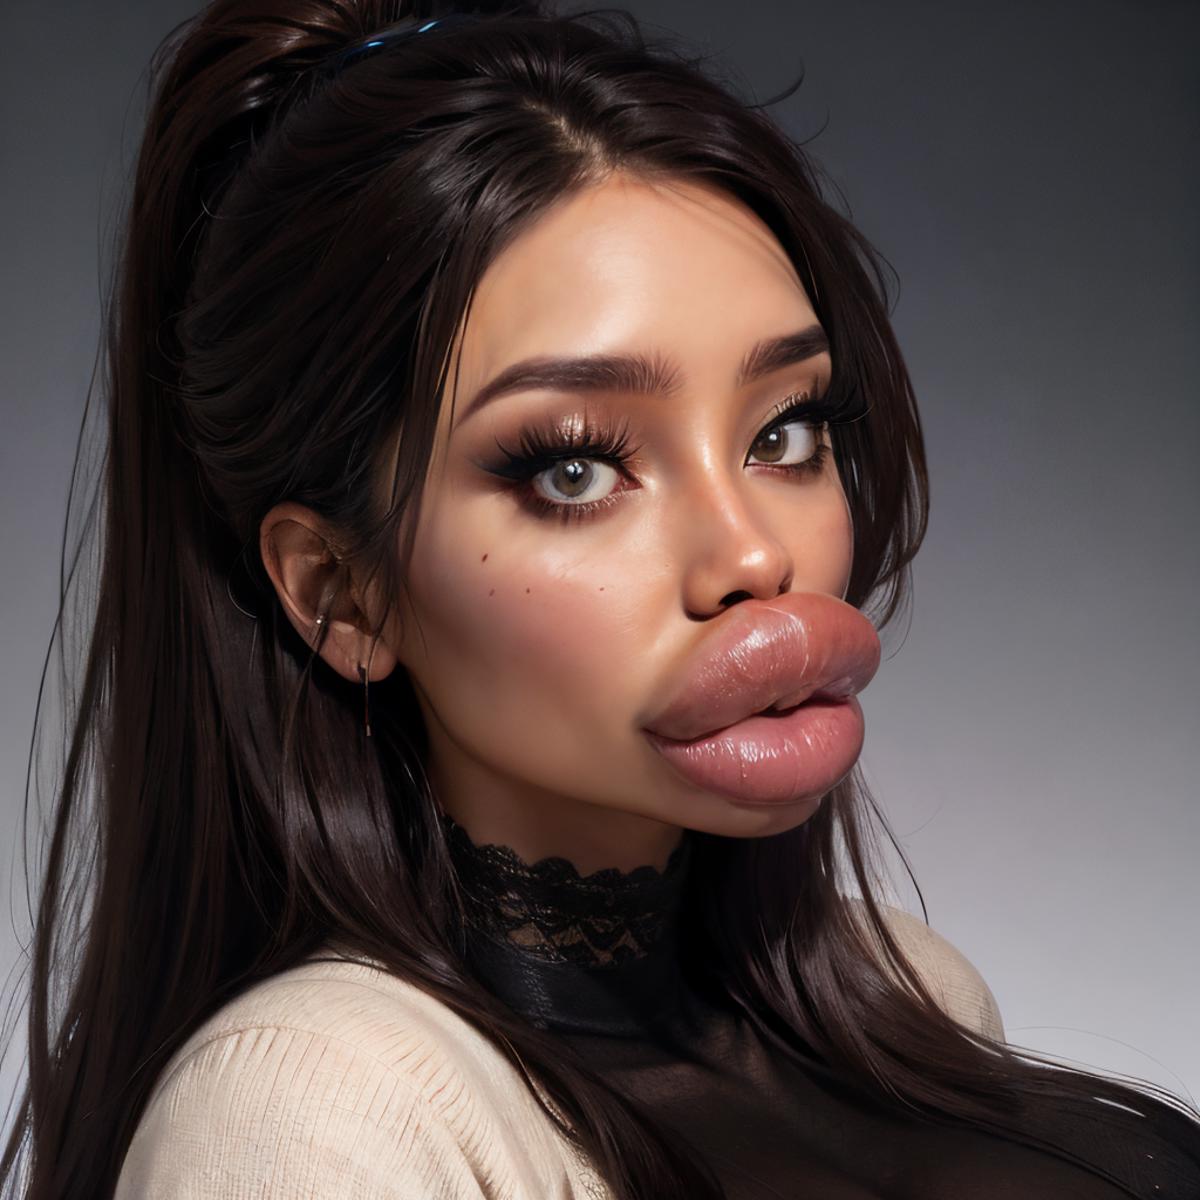 A woman with a large pout and a nose job.